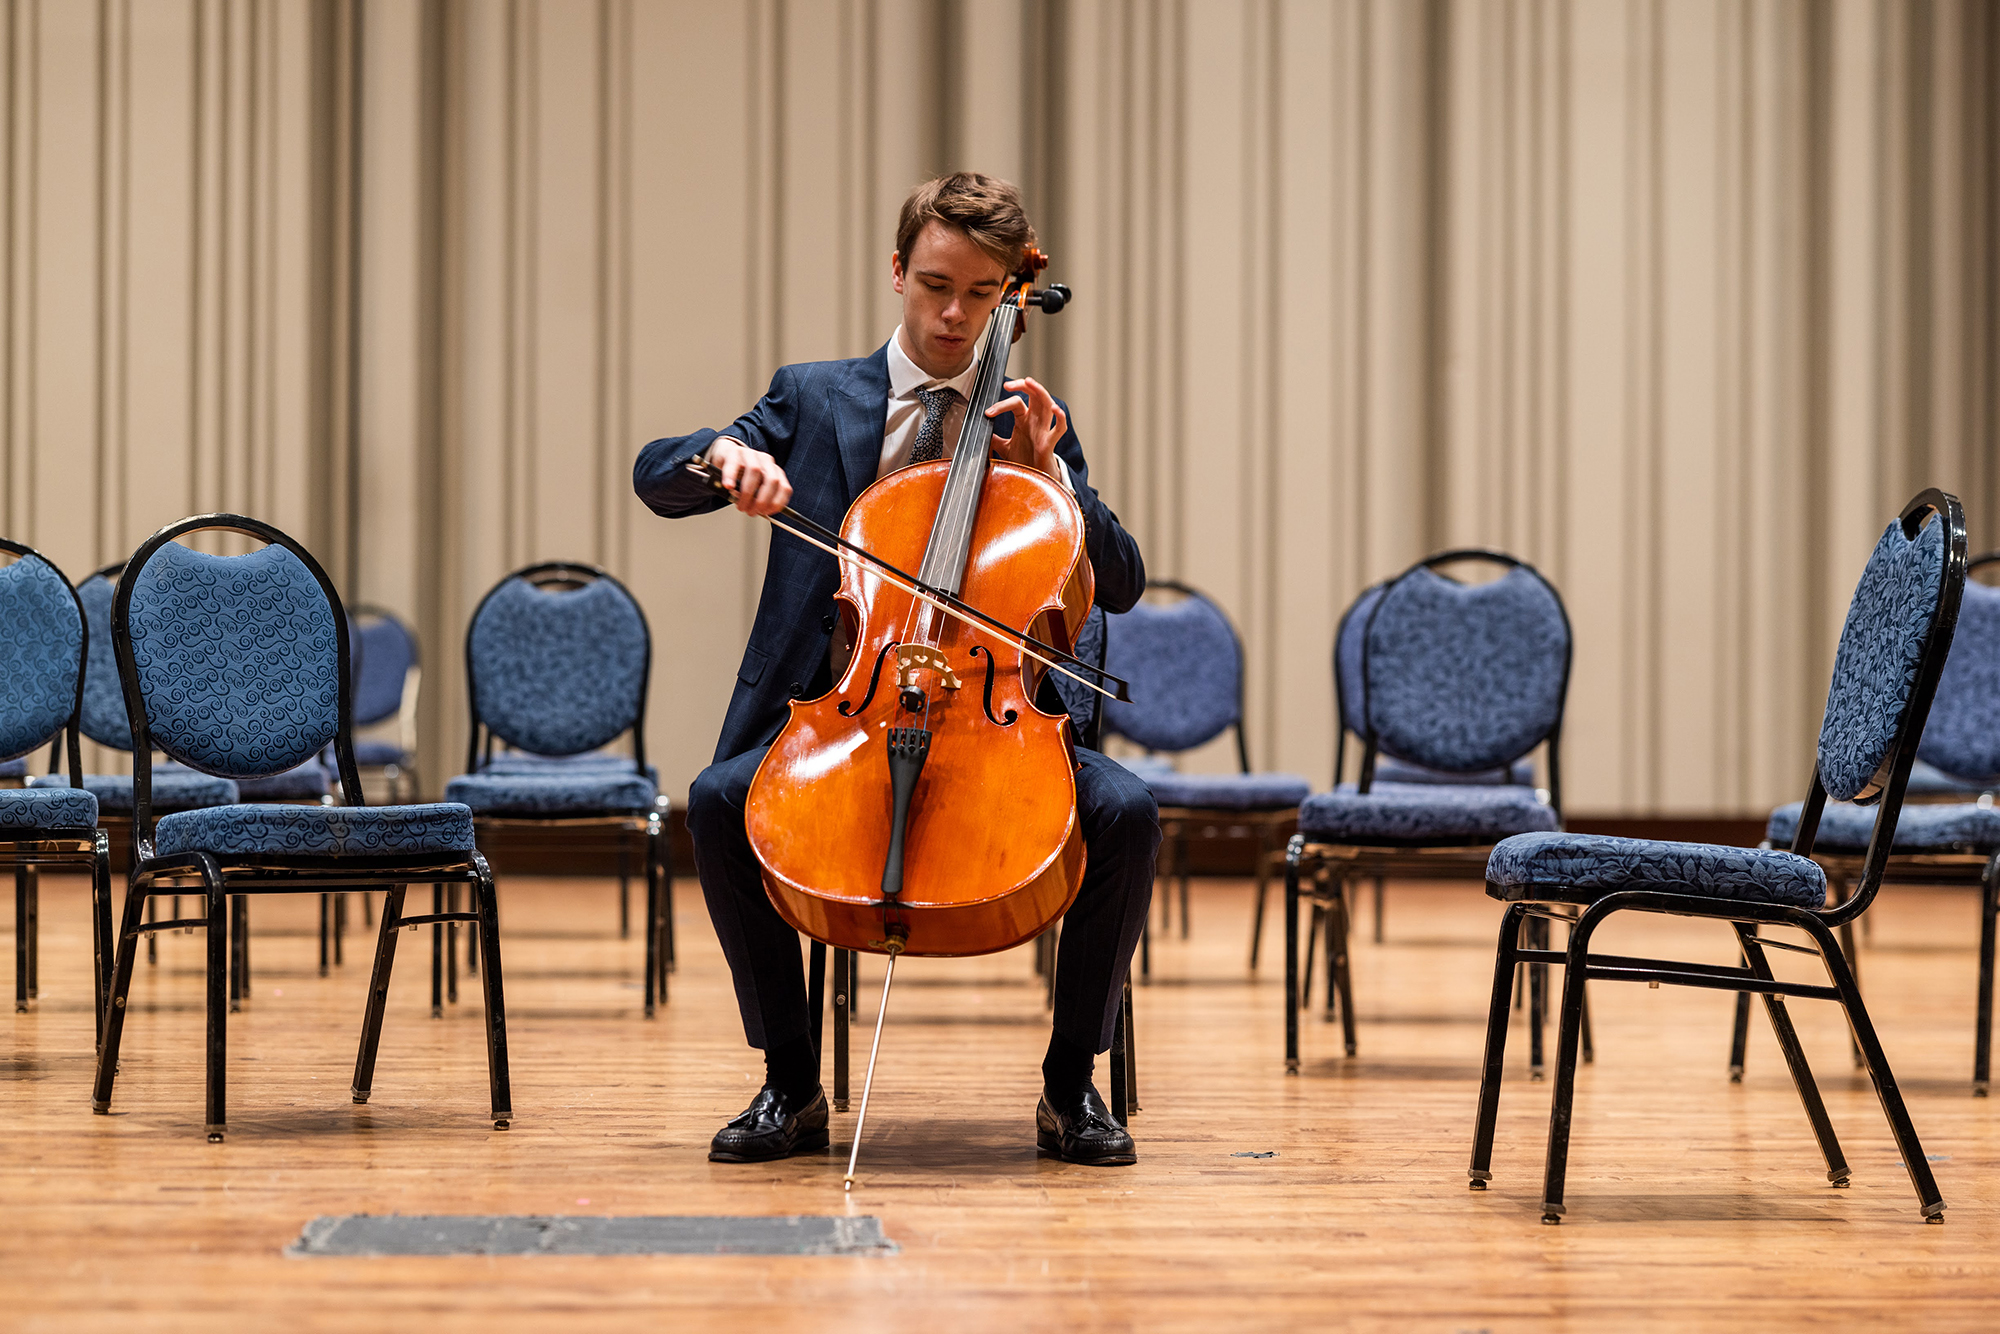 Thomas Sharrock playing the cello on a stage